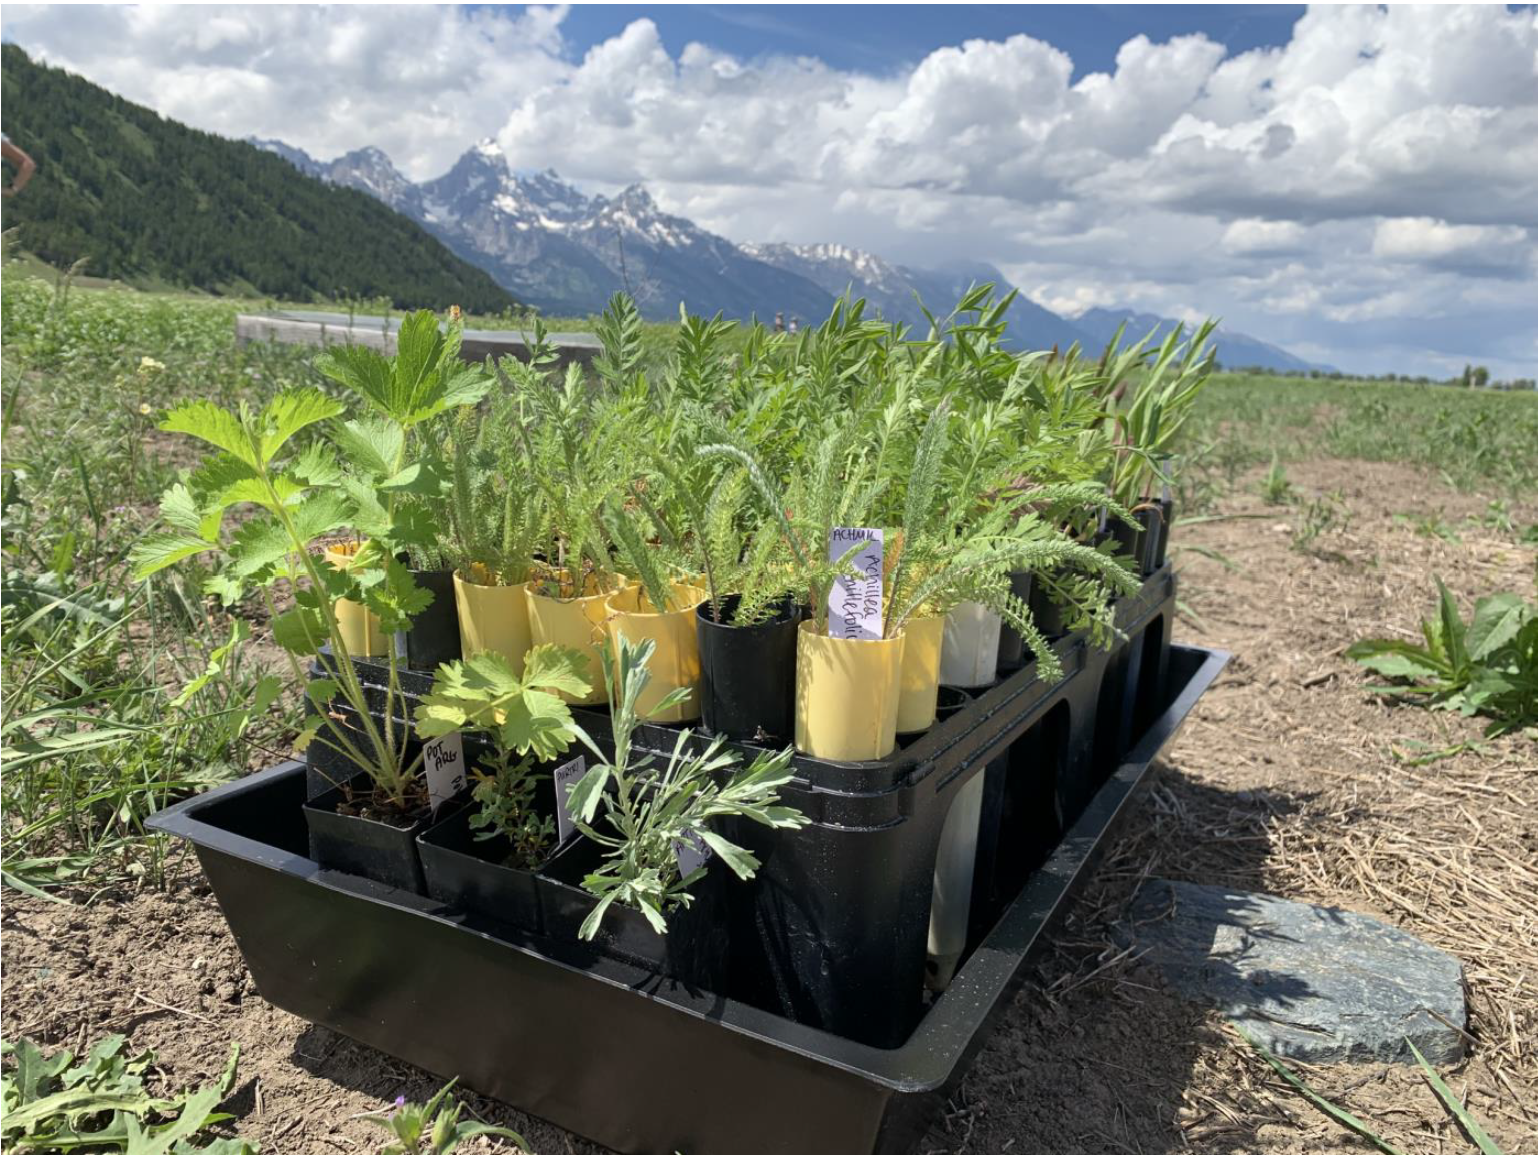 Native plant starts that were grown from seed collected in Grand Teton waiting to be planted as part of our multiyear project to restore sagebrush habitat.